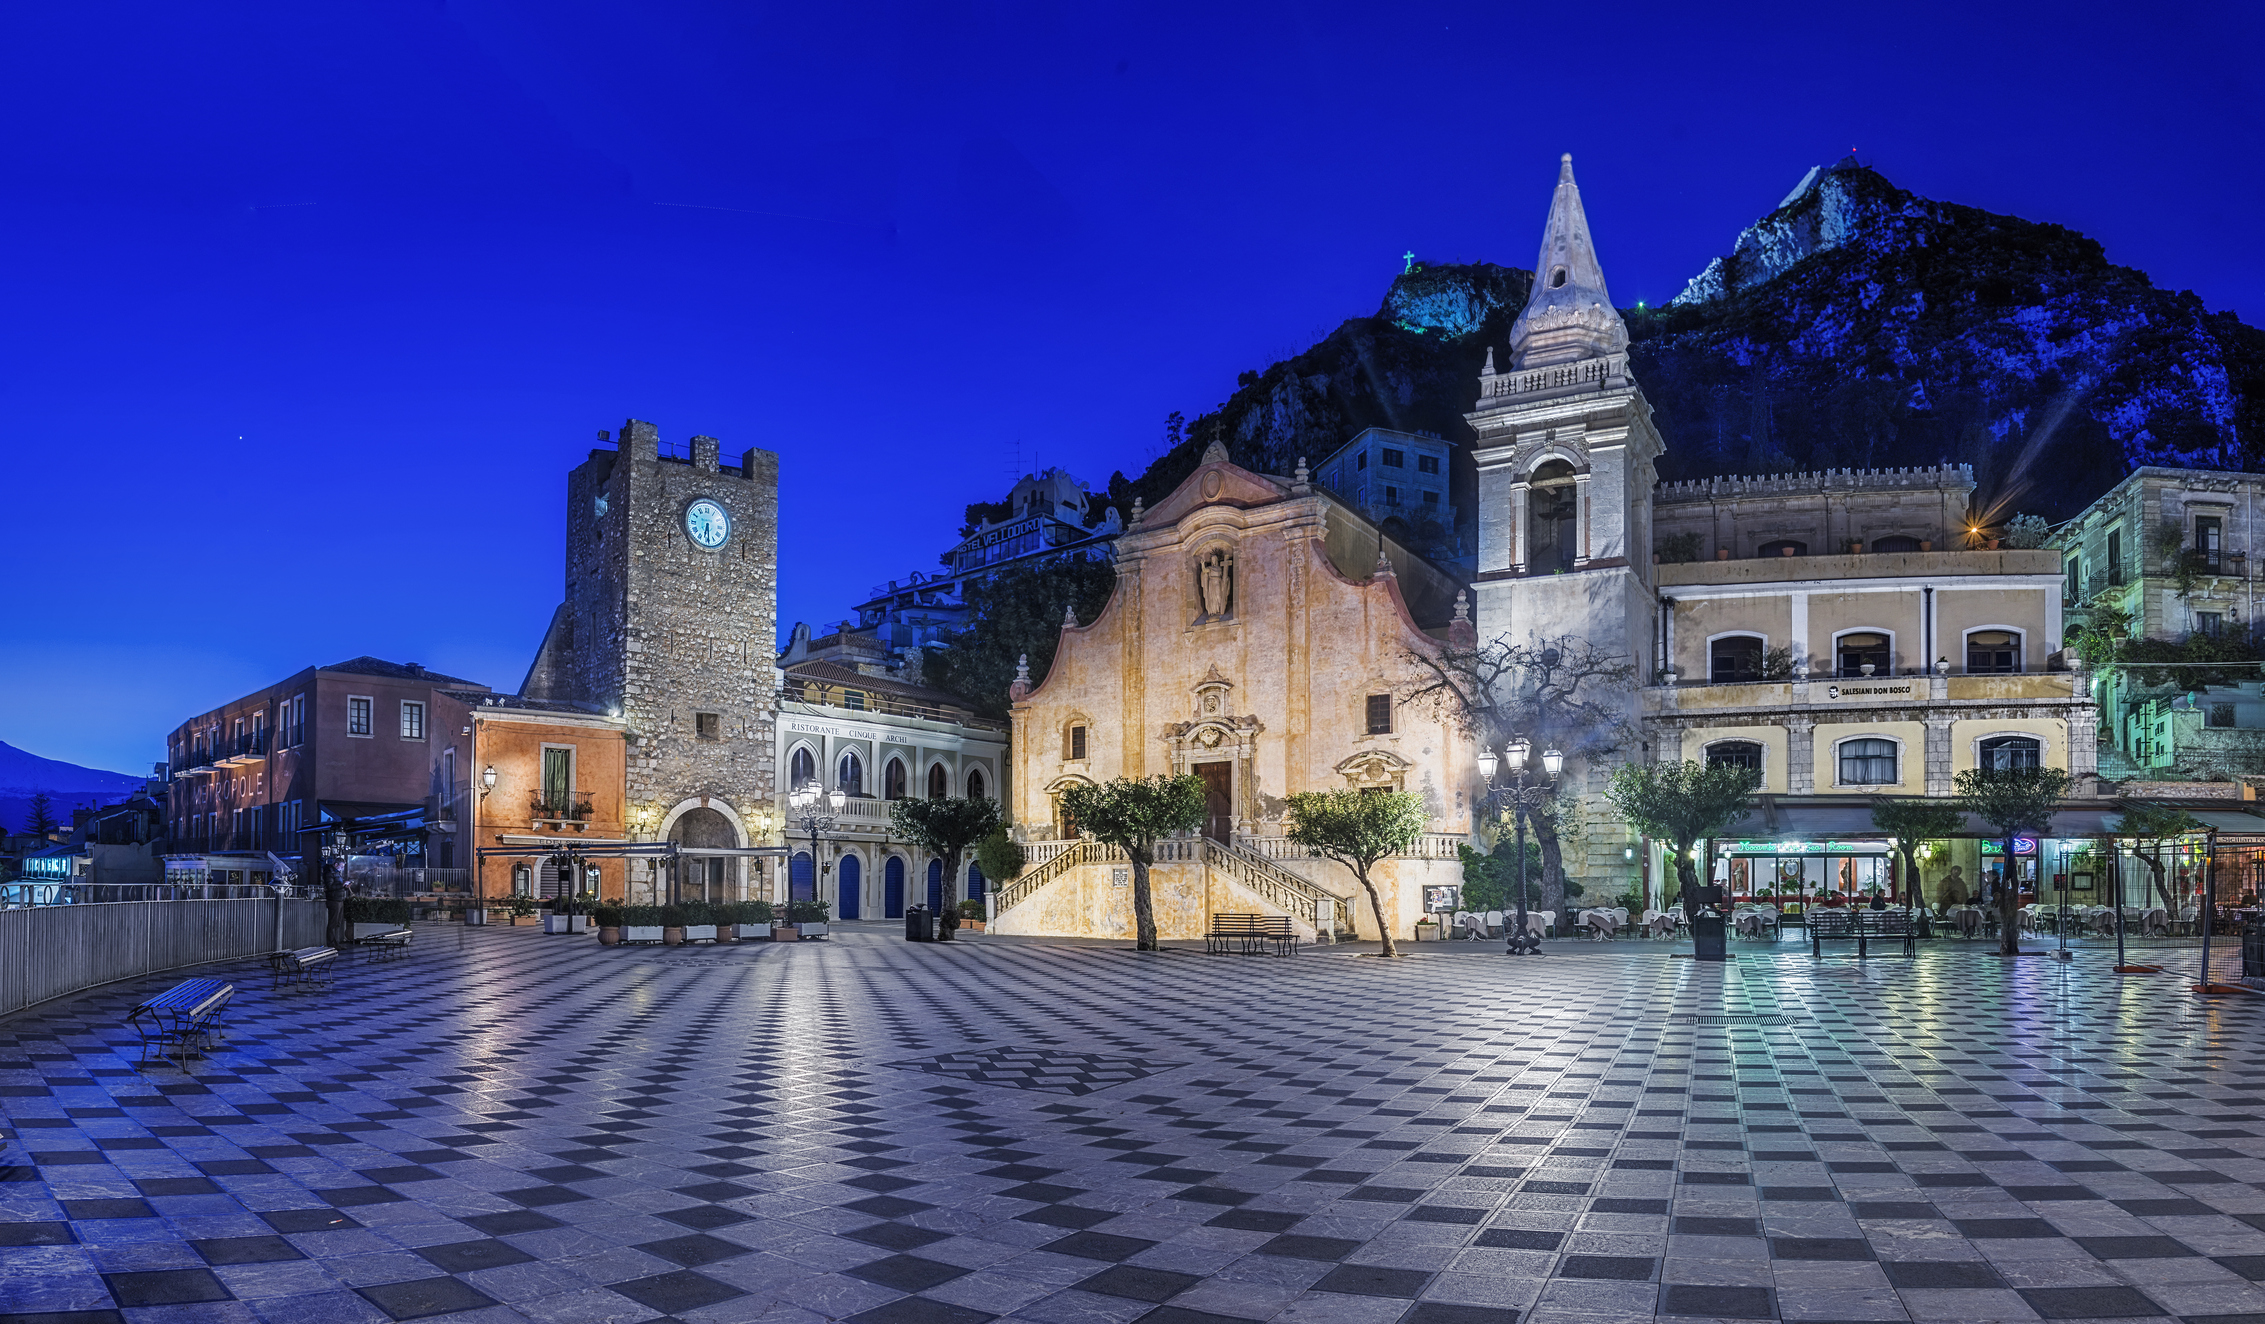 Belvedere of Taormina and San Giuseppe church on the square Piazza IX Aprile in Taormina, Sicily, Italy